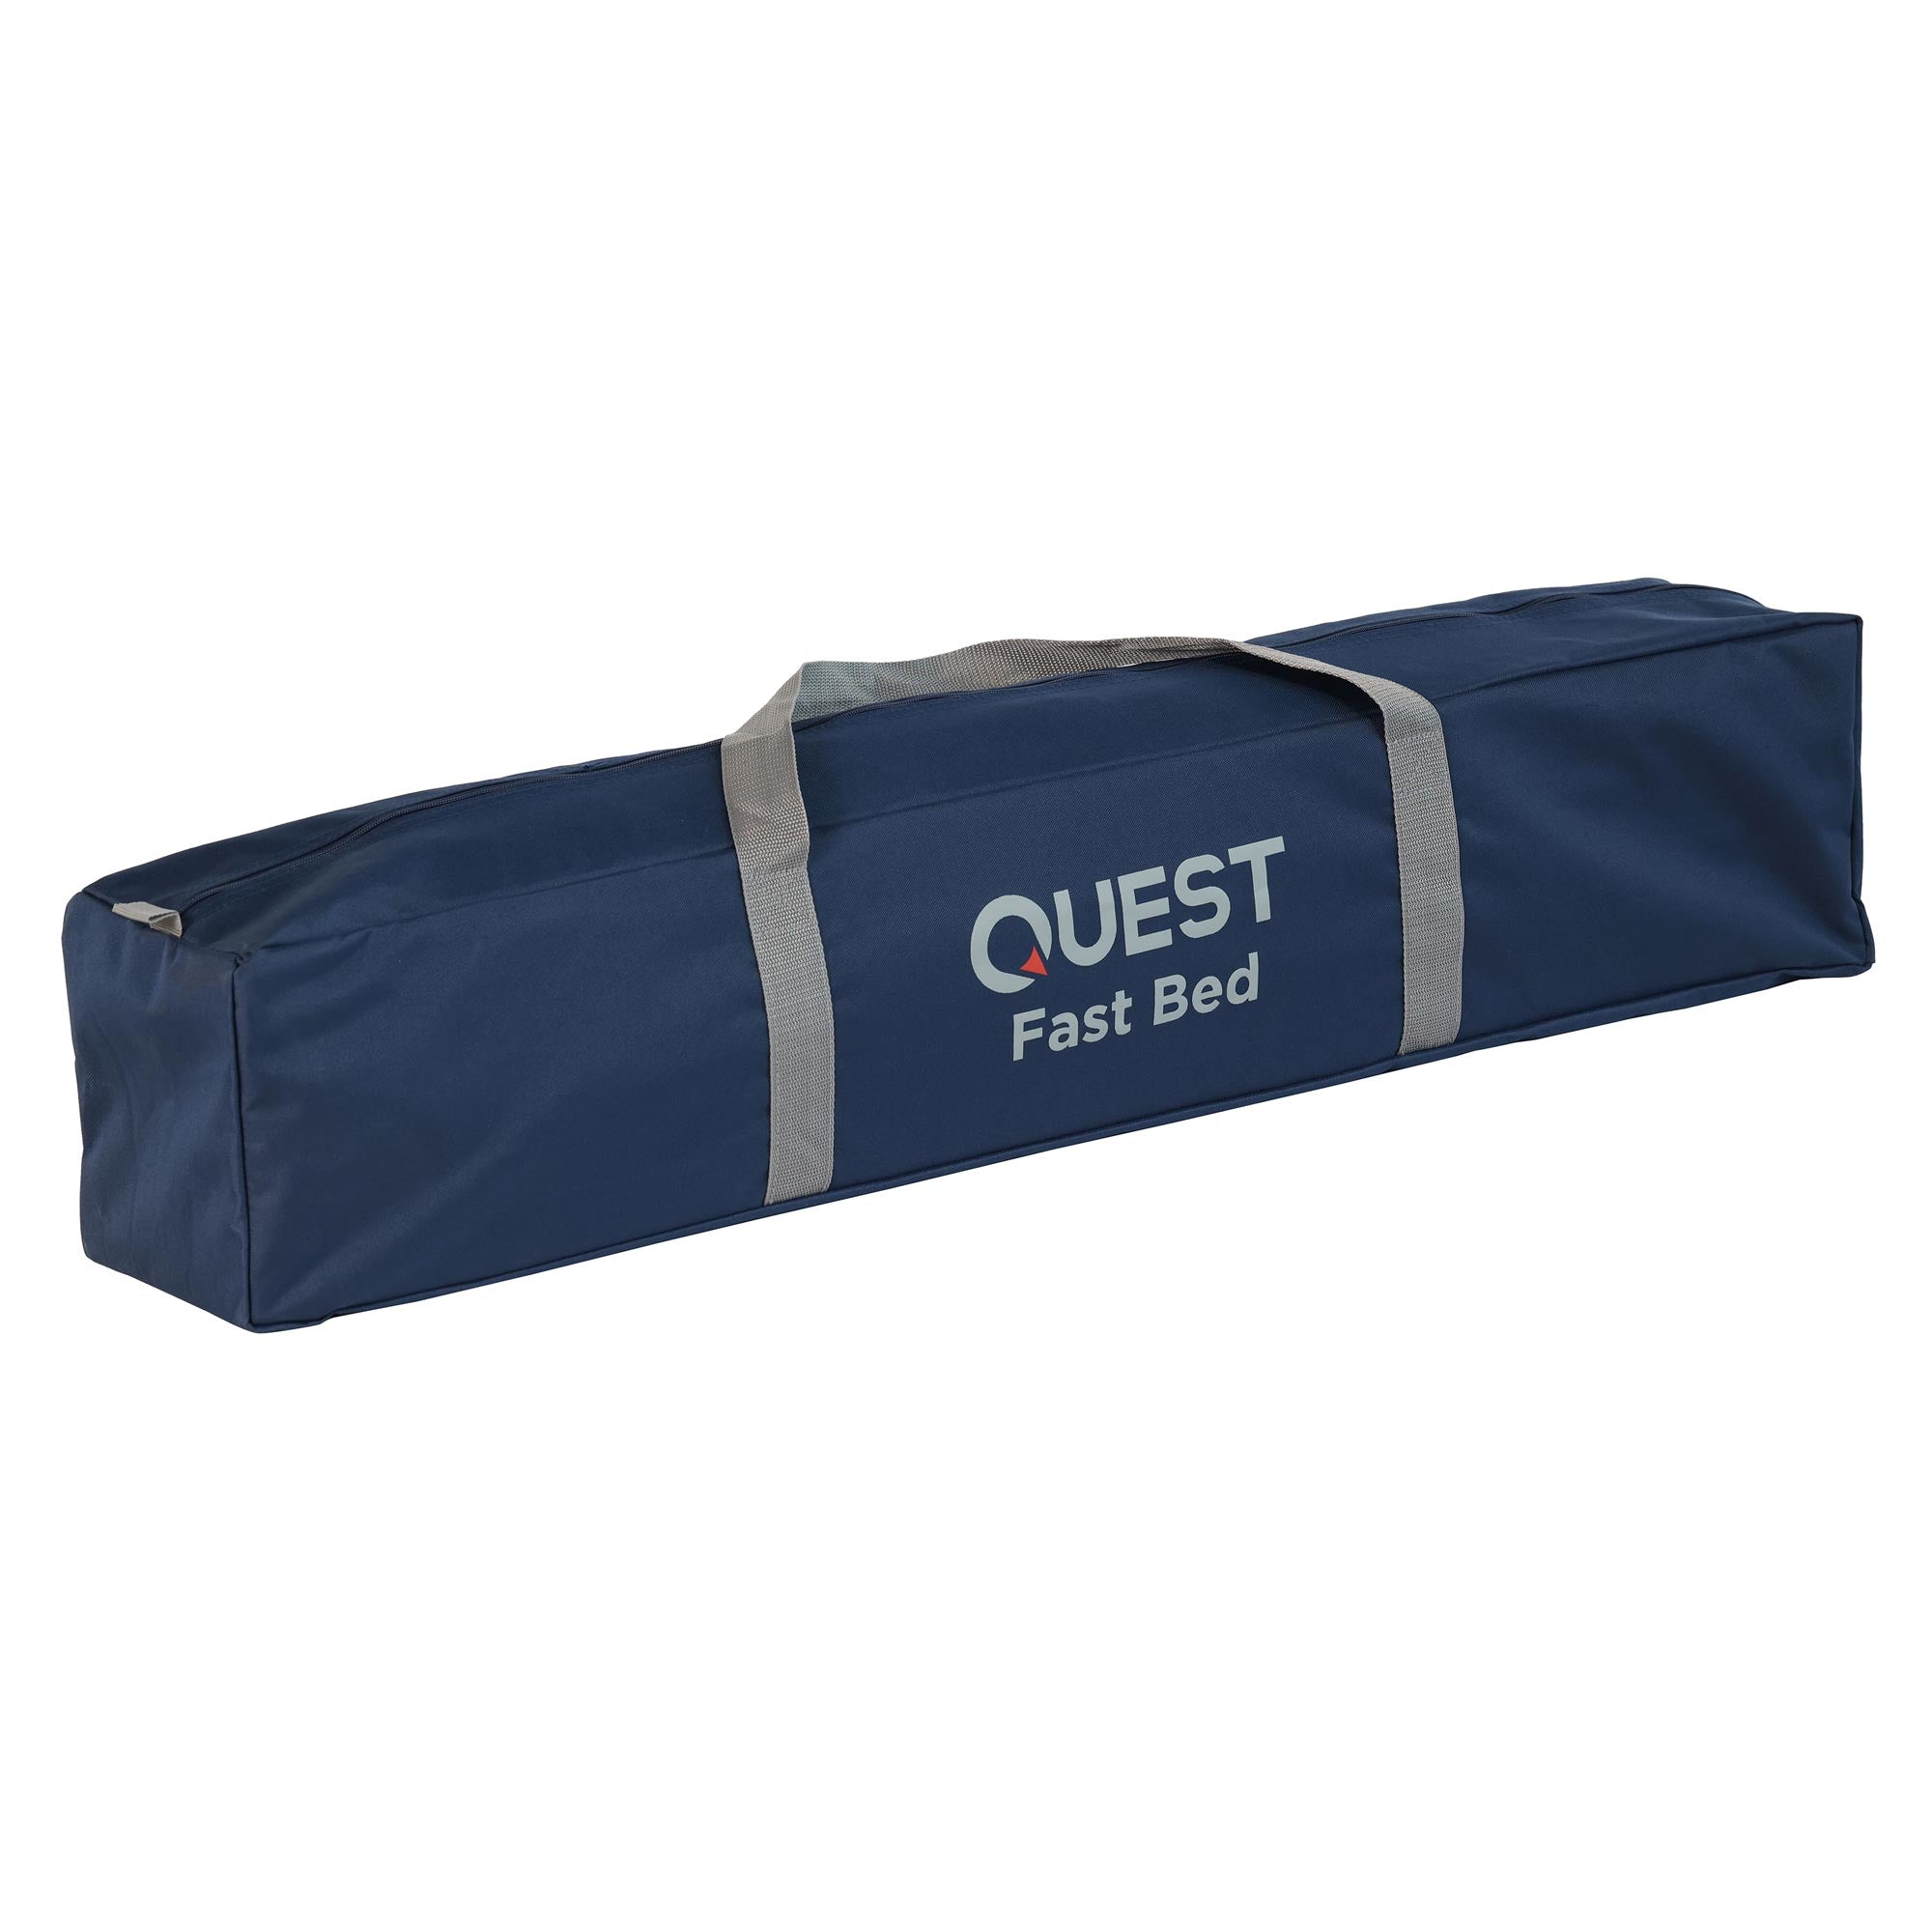 Quest Fast Bed - Large